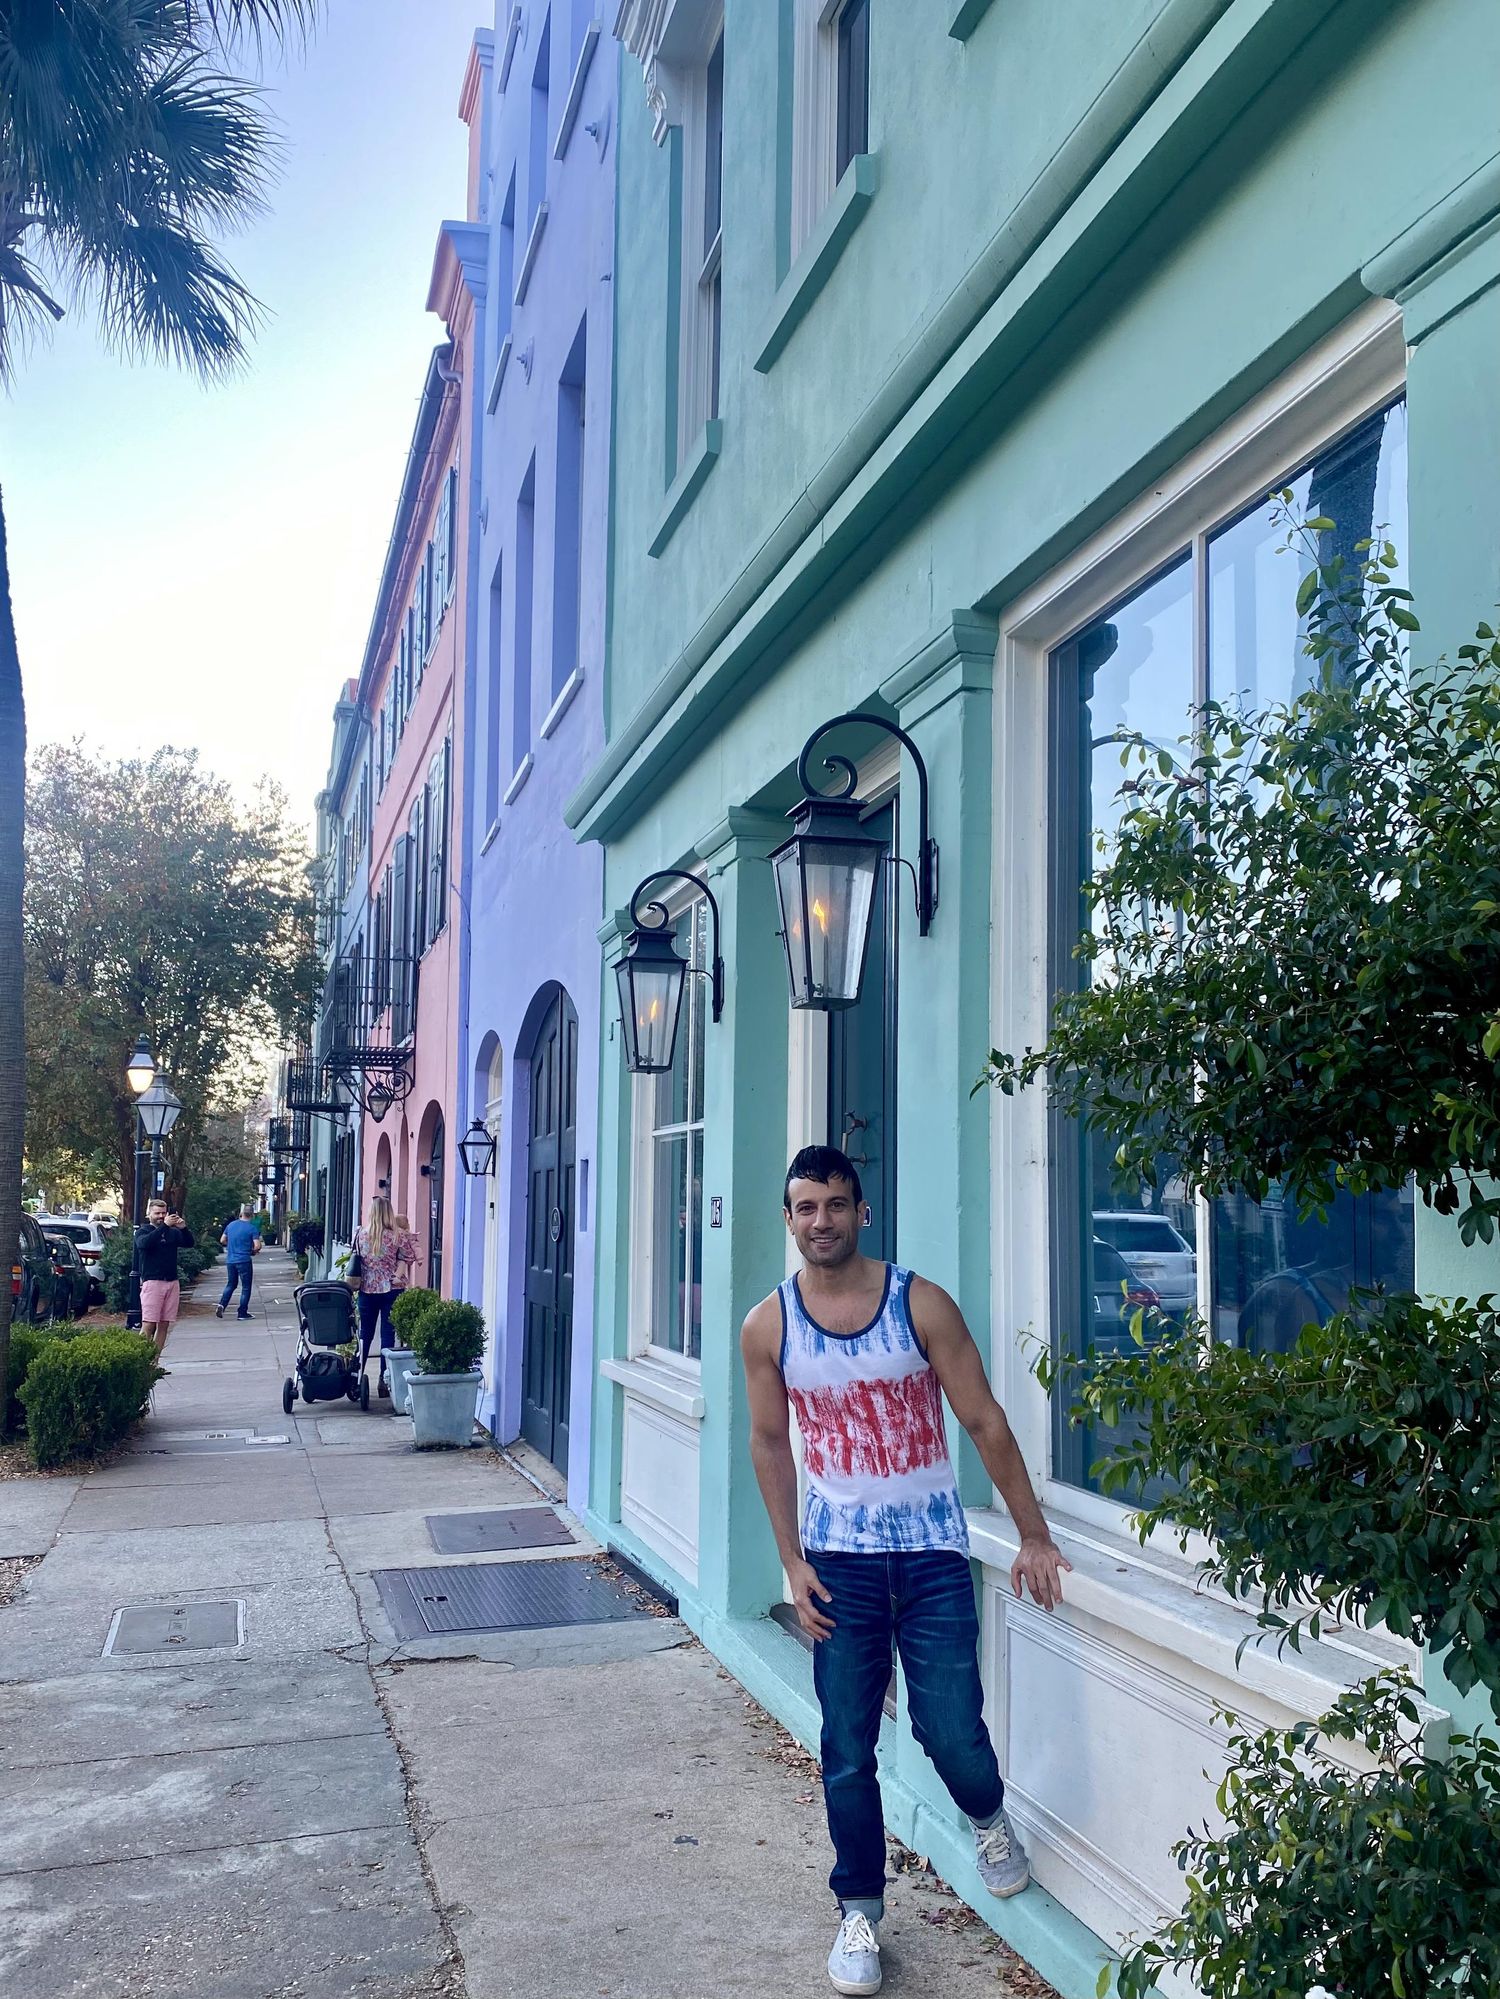 Young man standing in front of colorful buildings